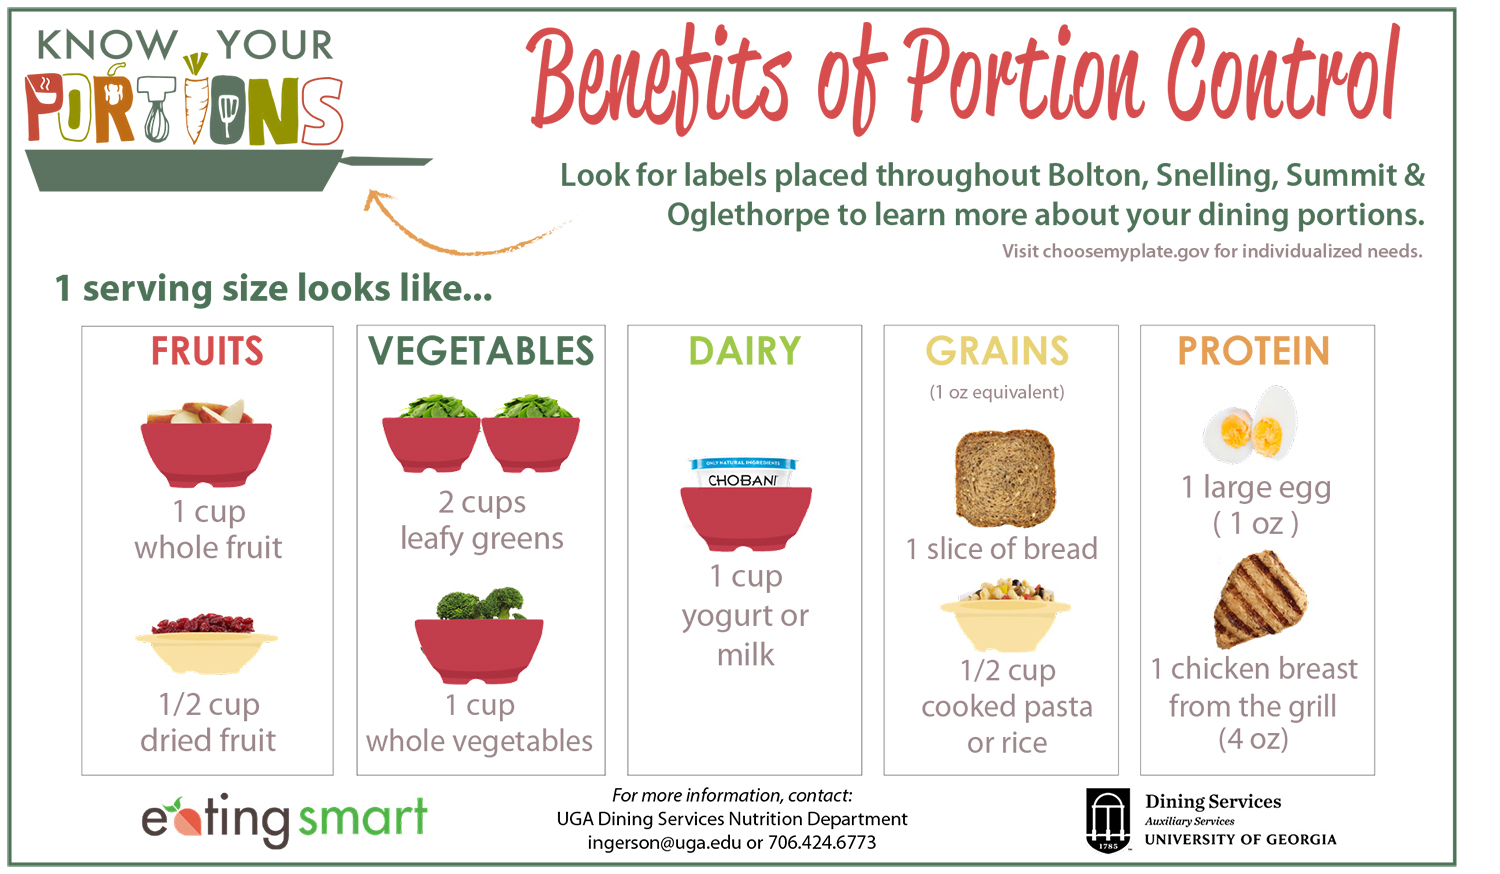 Benefits of Portion Control